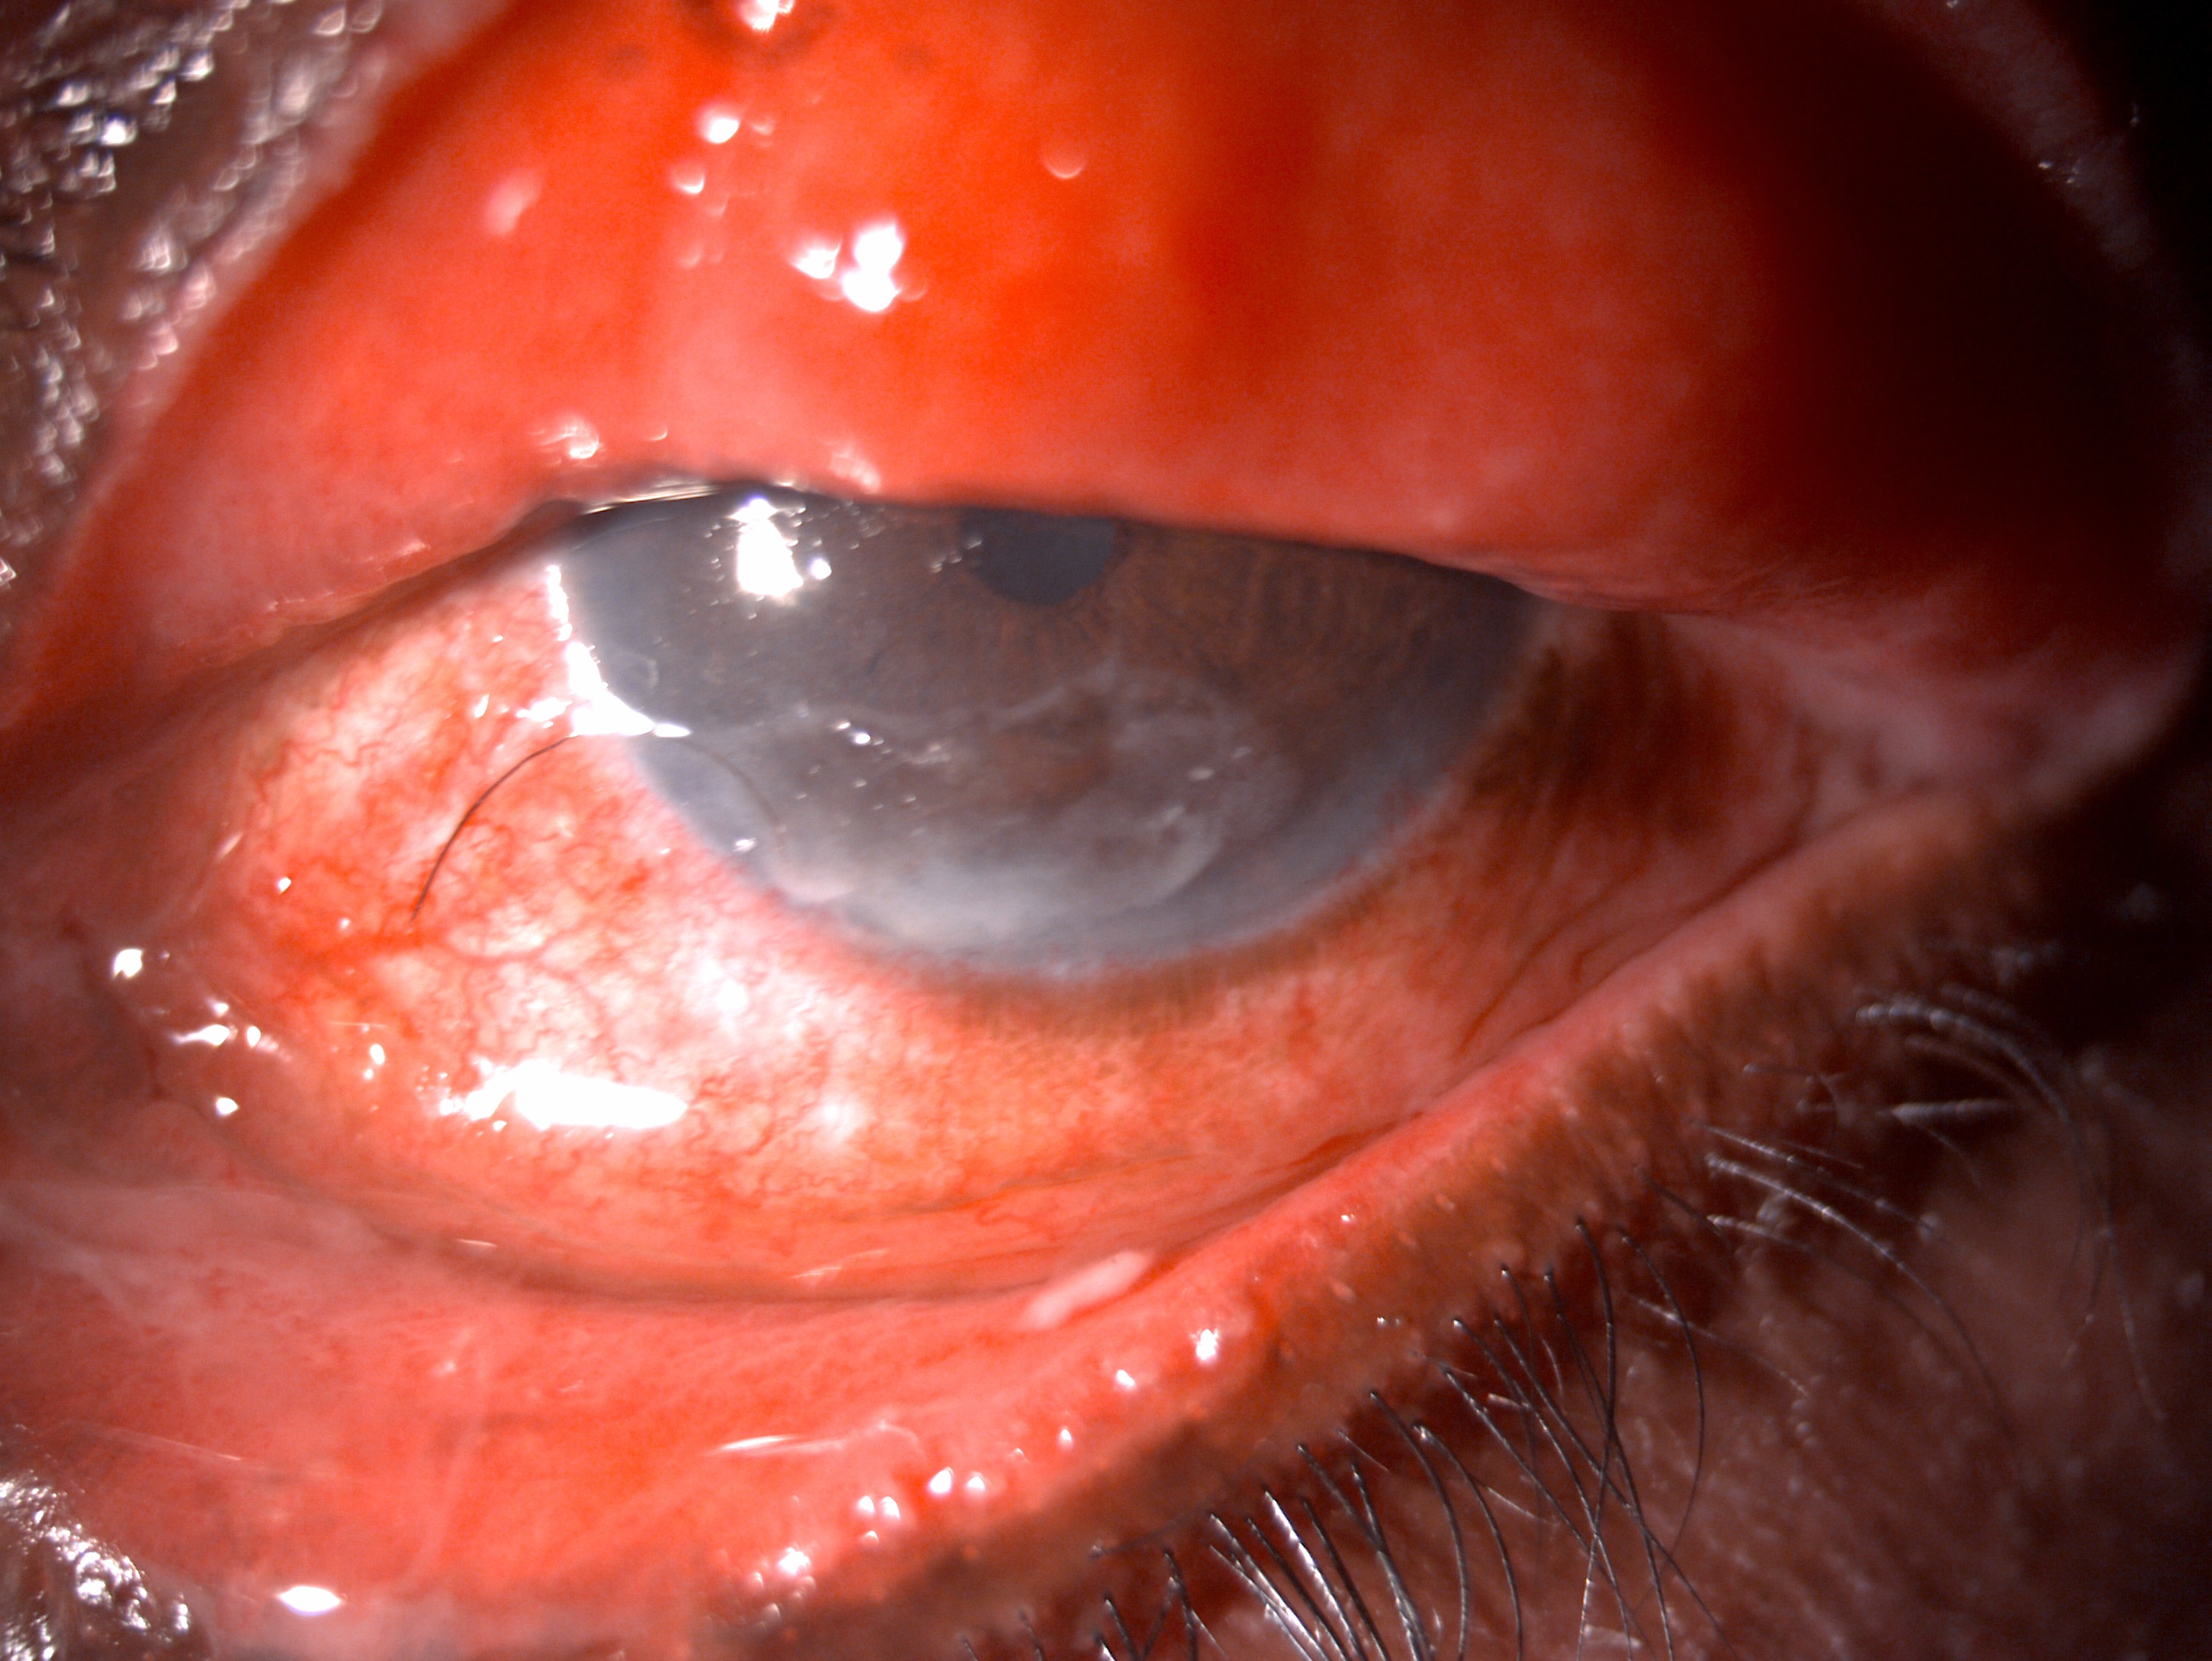 Digital slit lamp image of the patient with ocular thermal burn depicting lower lid ectropion, diffuse conjunctival congestion, conjunctival hyperemia, chemosis, mucopurulent discharge in lower tarsal conjunctival, inferior 1/3 corneal anterior stromal infiltrate suggestive of exposure keratopathy